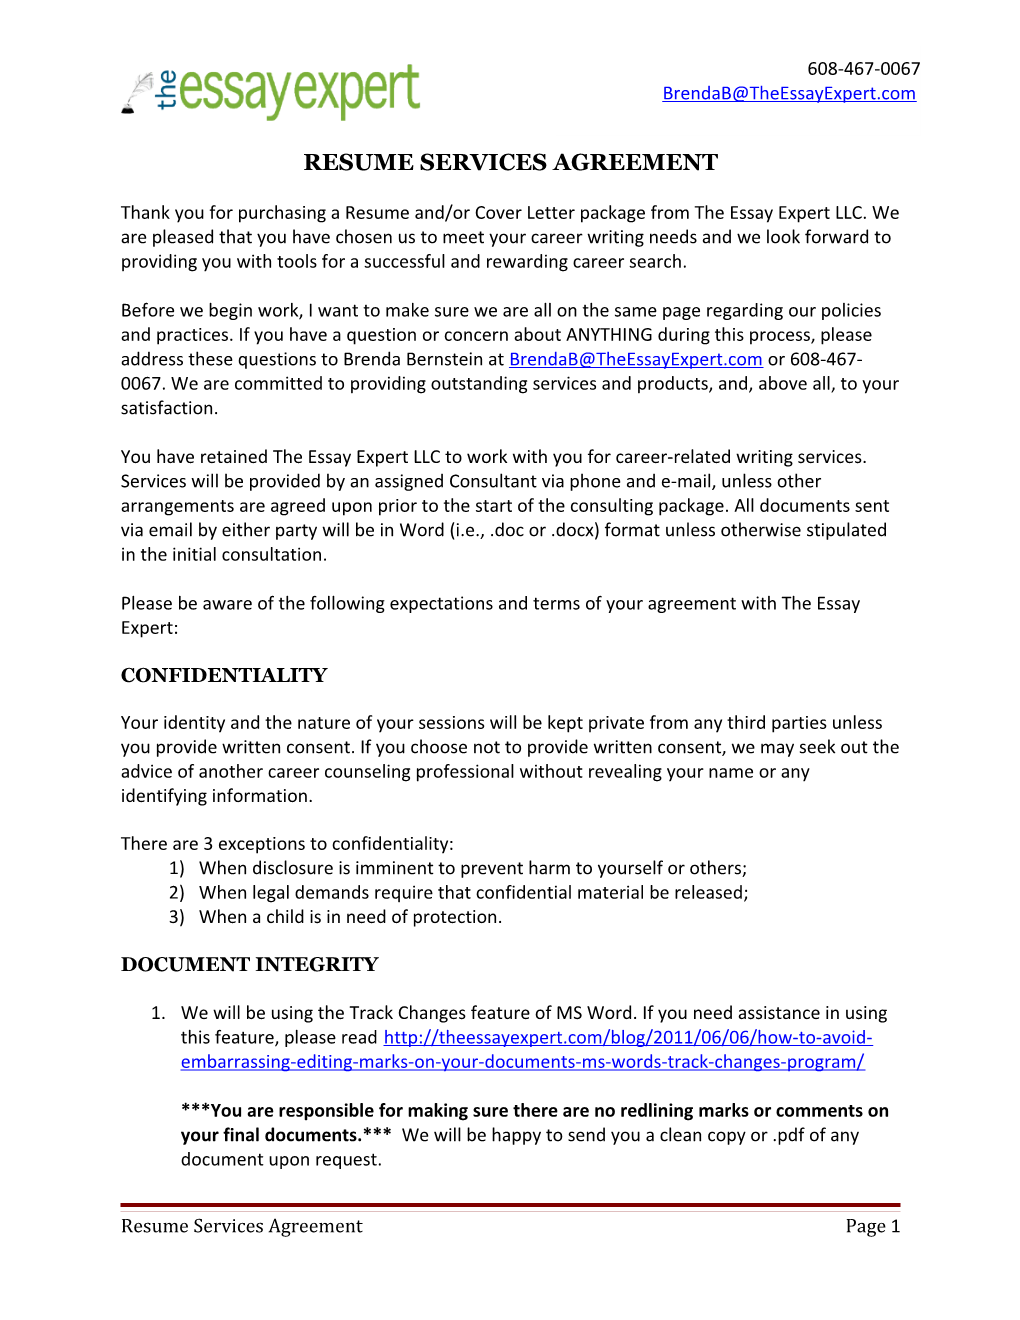 Resume Services Agreement